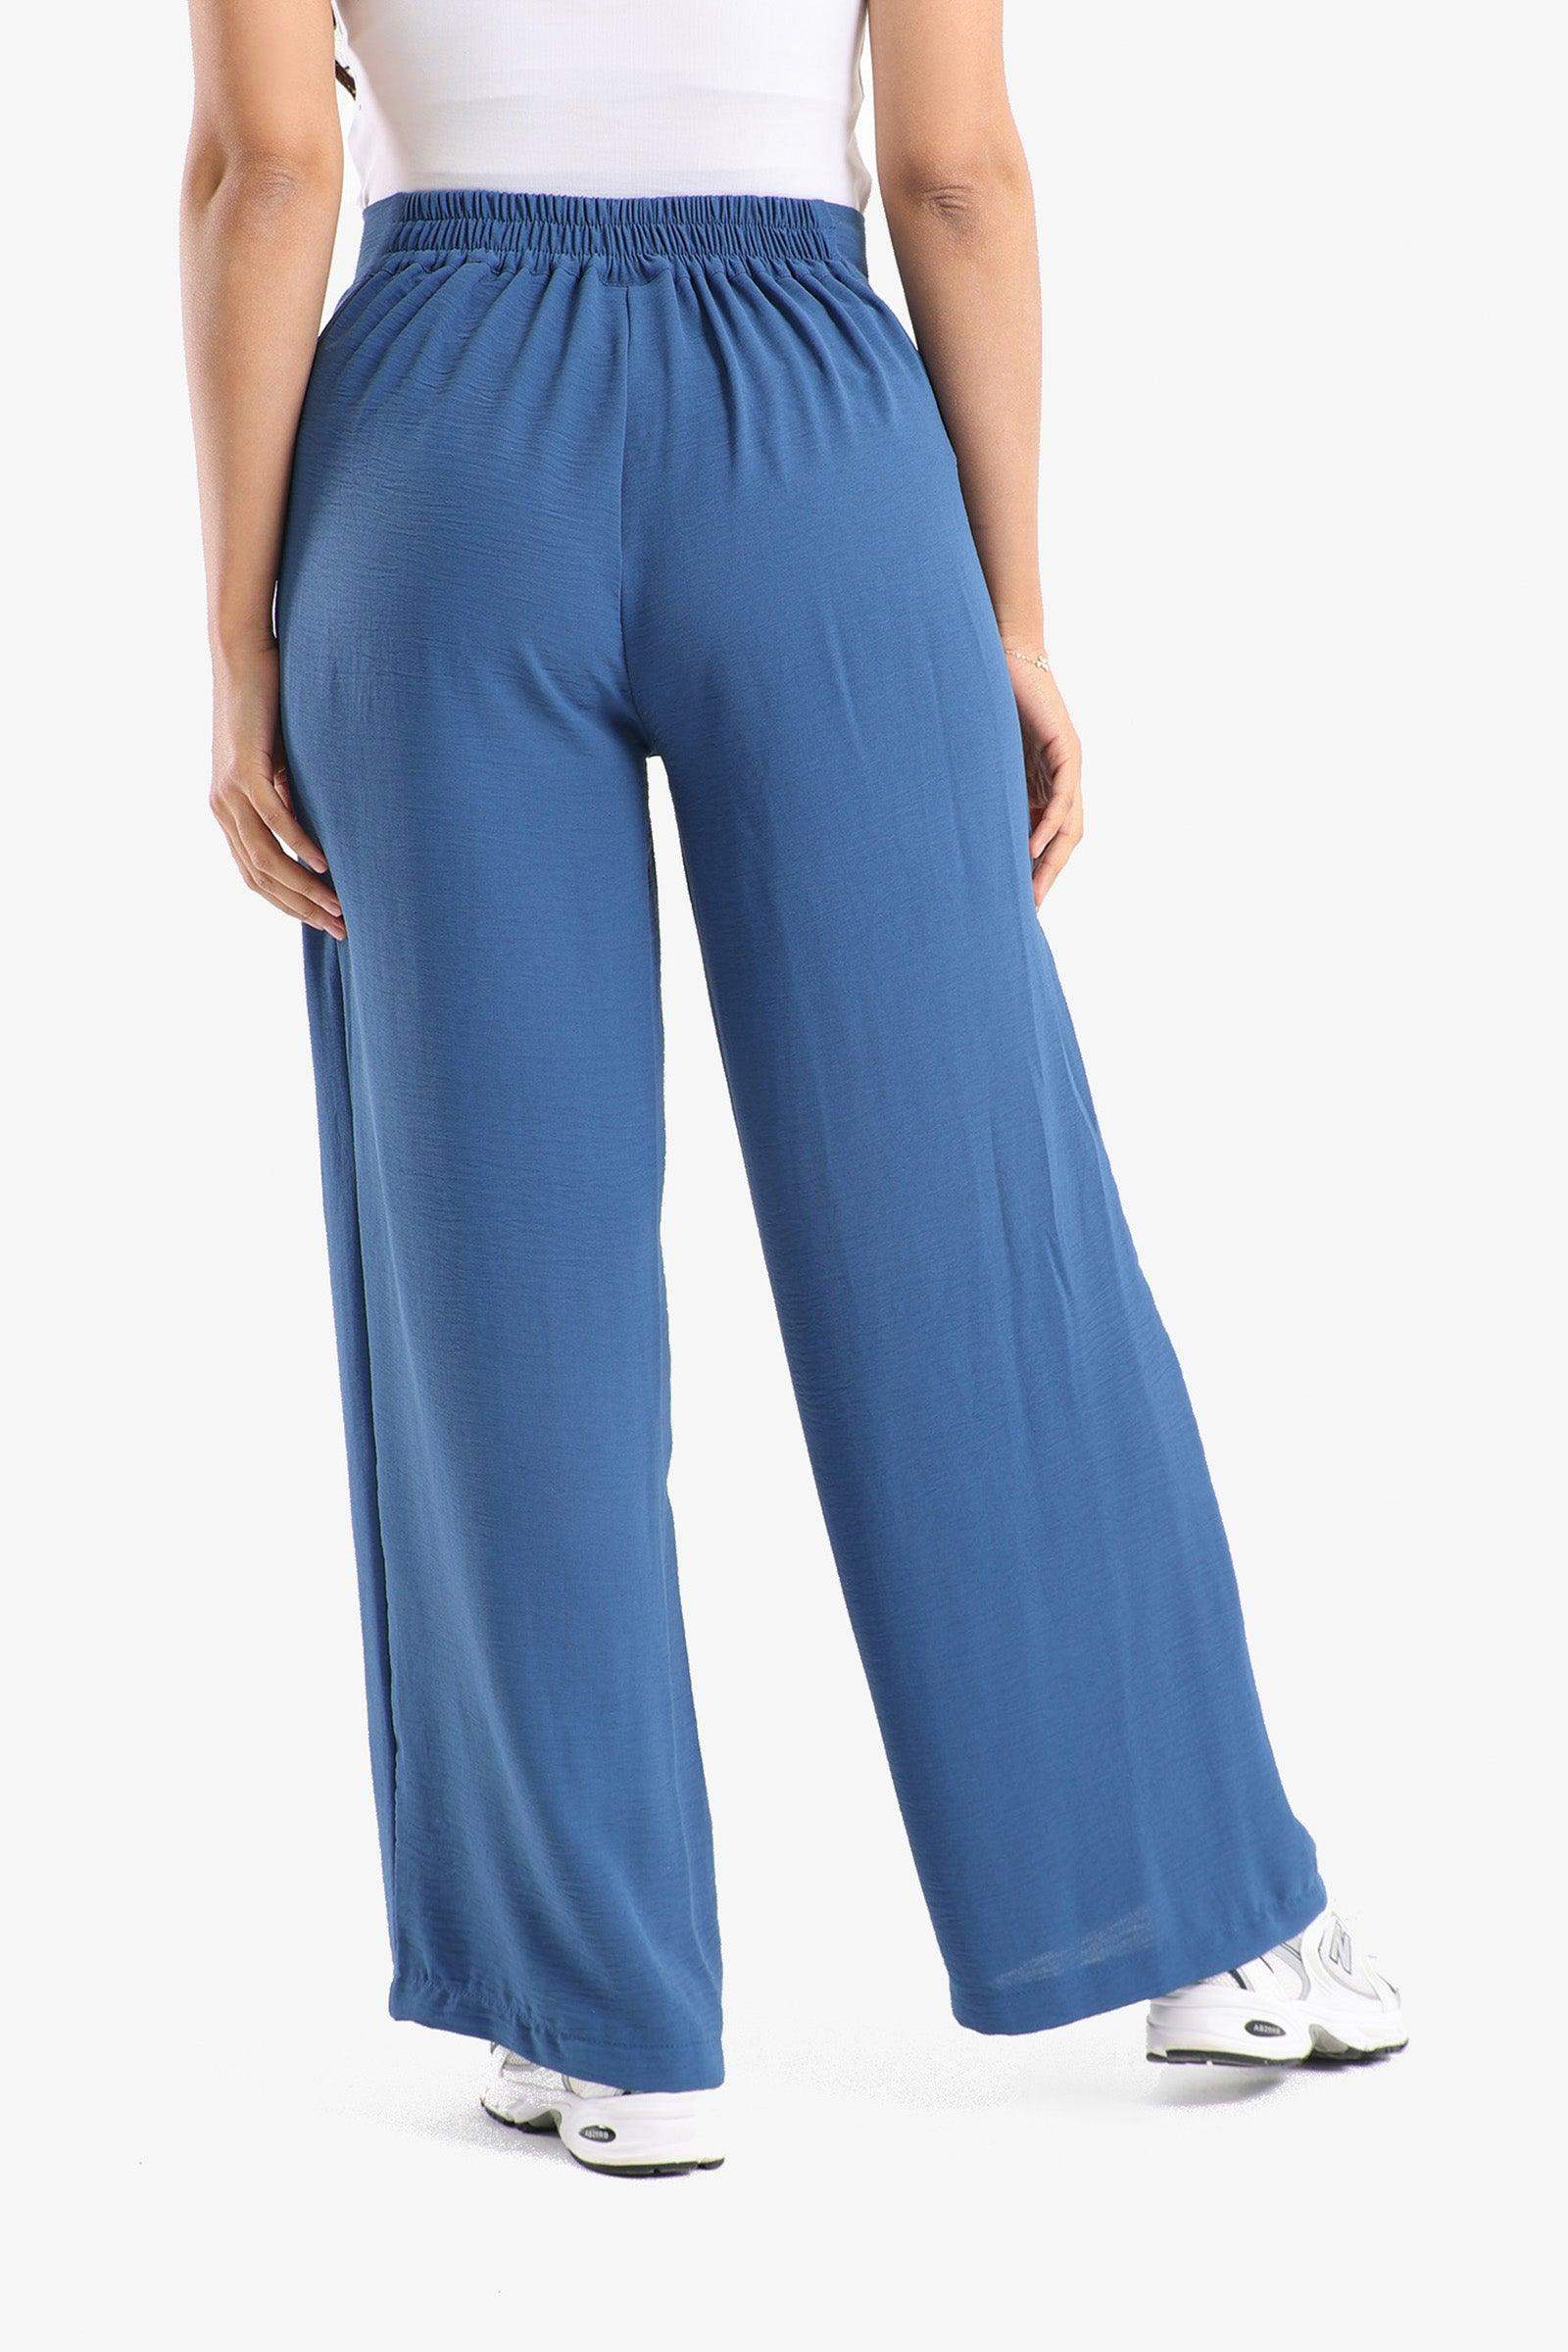 Voile Straight Cut Pants - Carina - كارينا